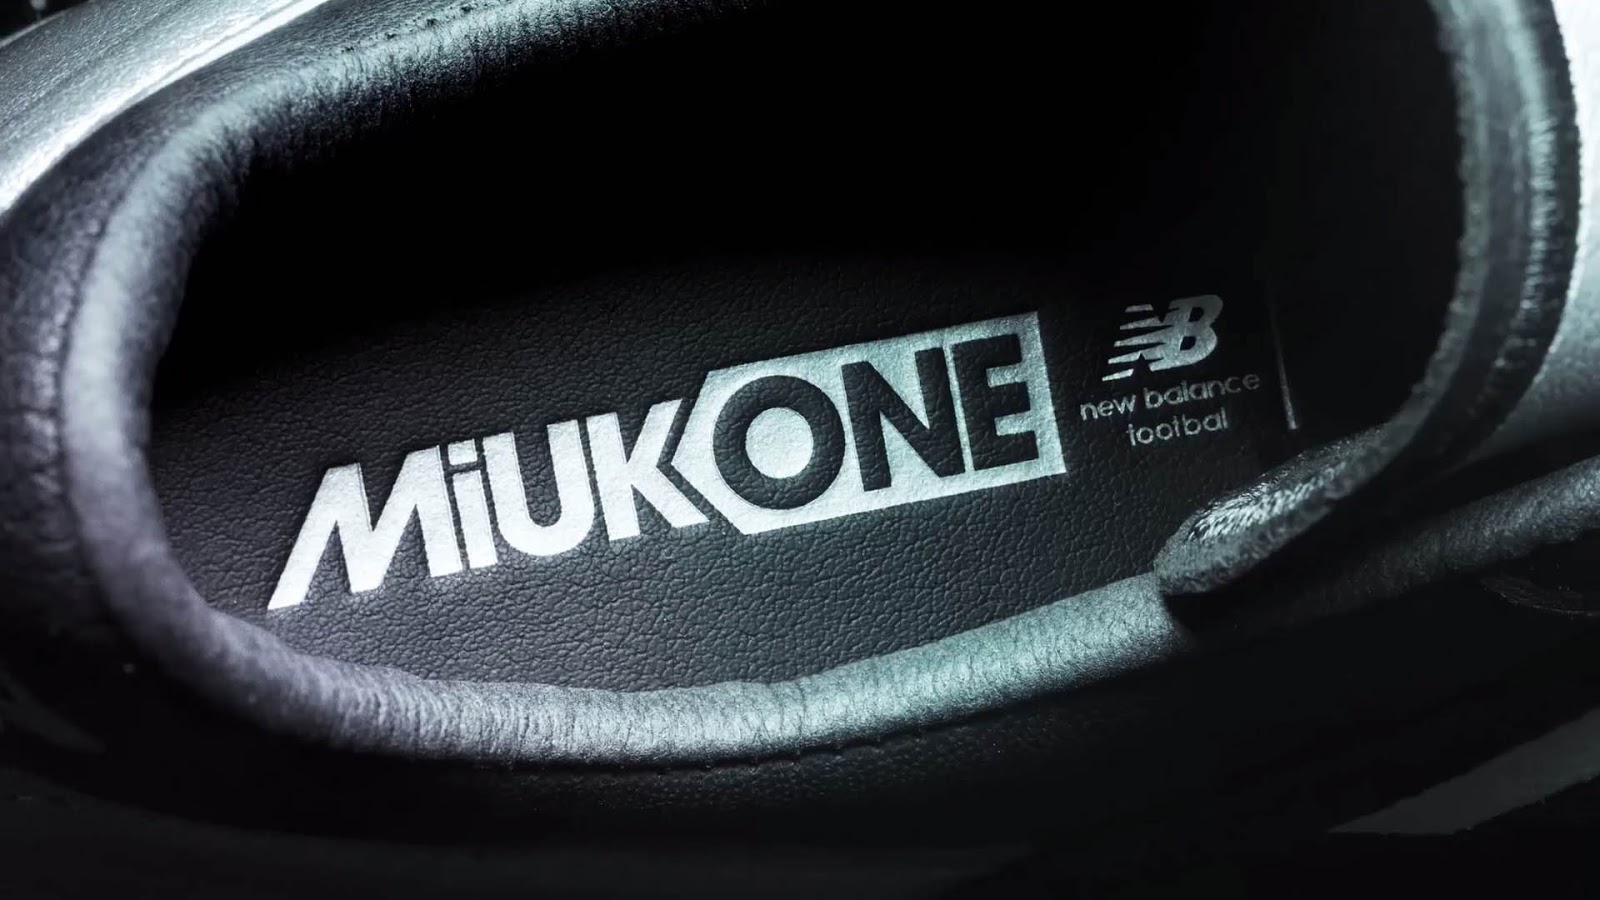 MiUK One - New Balance Releases Limited Edition Made in UK Football